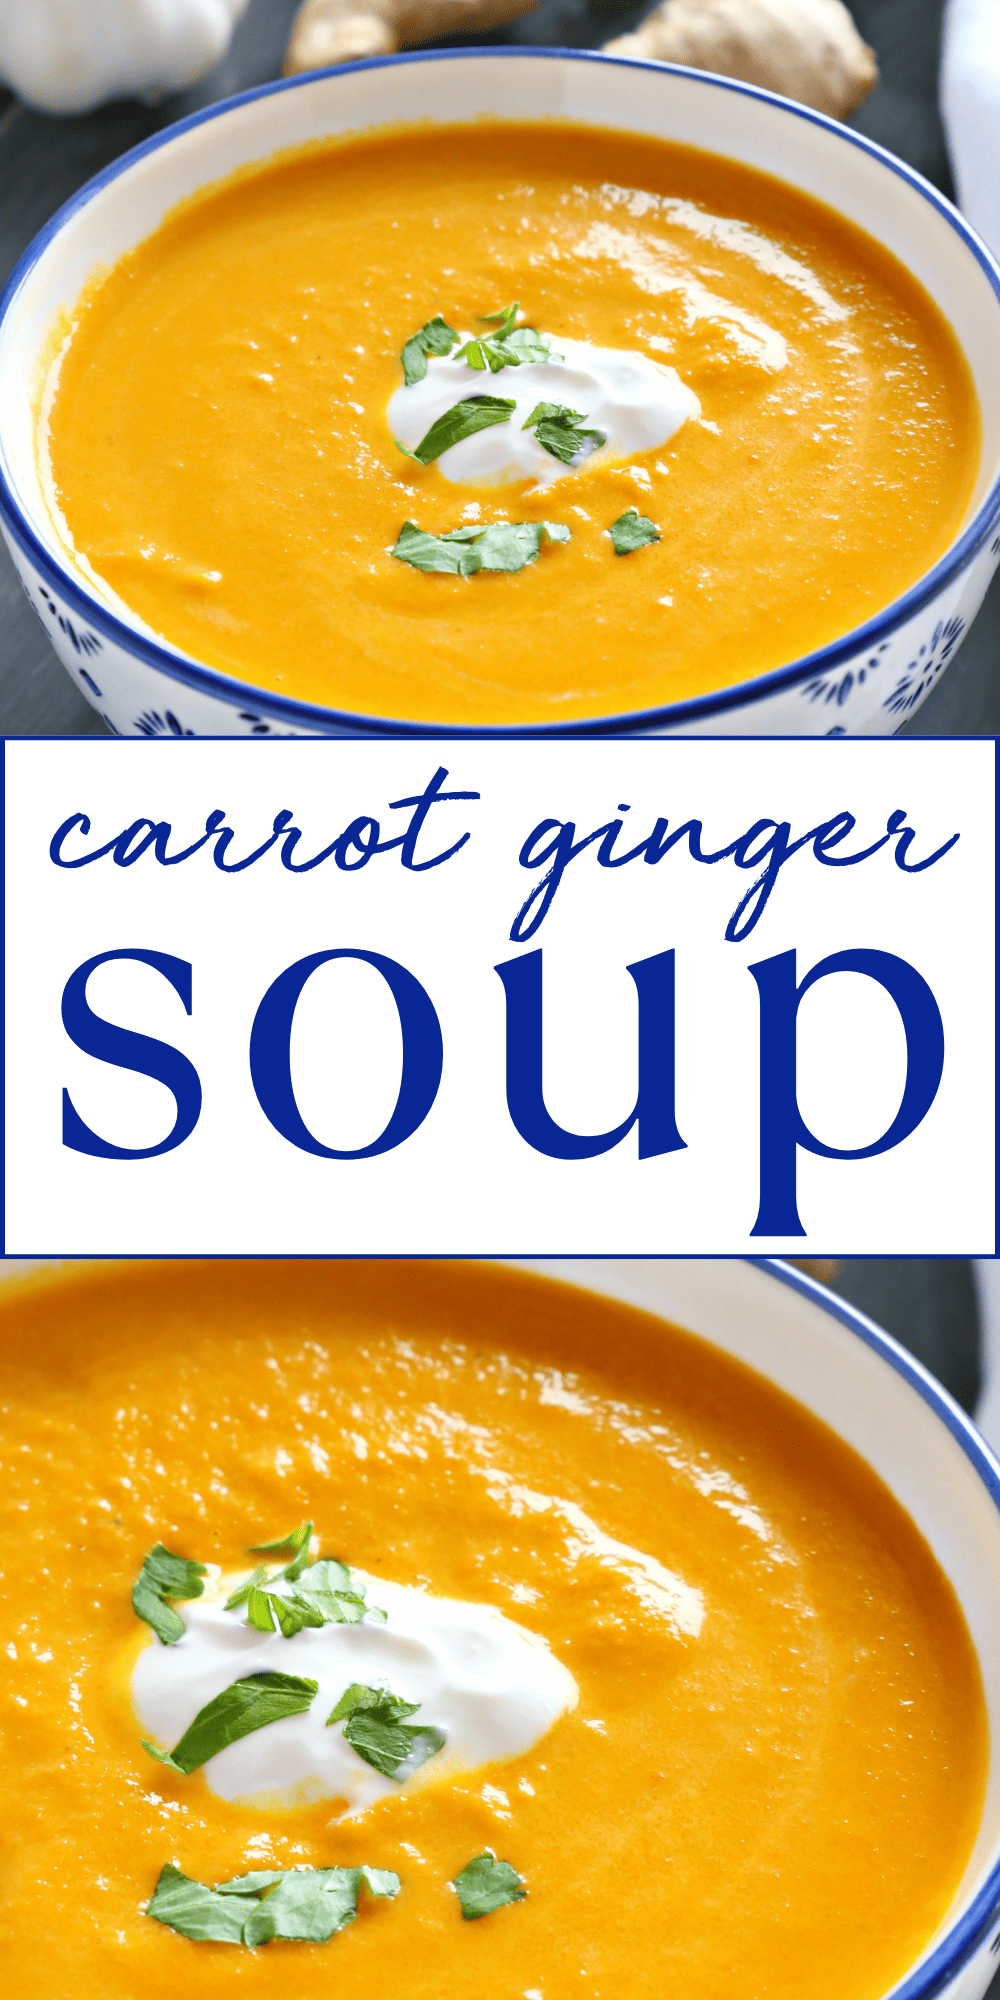 This Carrot Ginger Soup recipe is the best carrot soup made with fresh carrots and ginger. It's healthy, hearty, and packed with spicy ginger and creamy coconut. Make it in 30 minutes or less with simple ingredients! Recipe from thebusybaker.ca! #bestevercarrotsoup #creamycarrotsoup #carrotsoupdairyfree #vegancarrotsoup #carrotgingersoup #carrotsoup #carrotsouprecipe #carrotgingersouprecipe #gingercarrotsoup via @busybakerblog